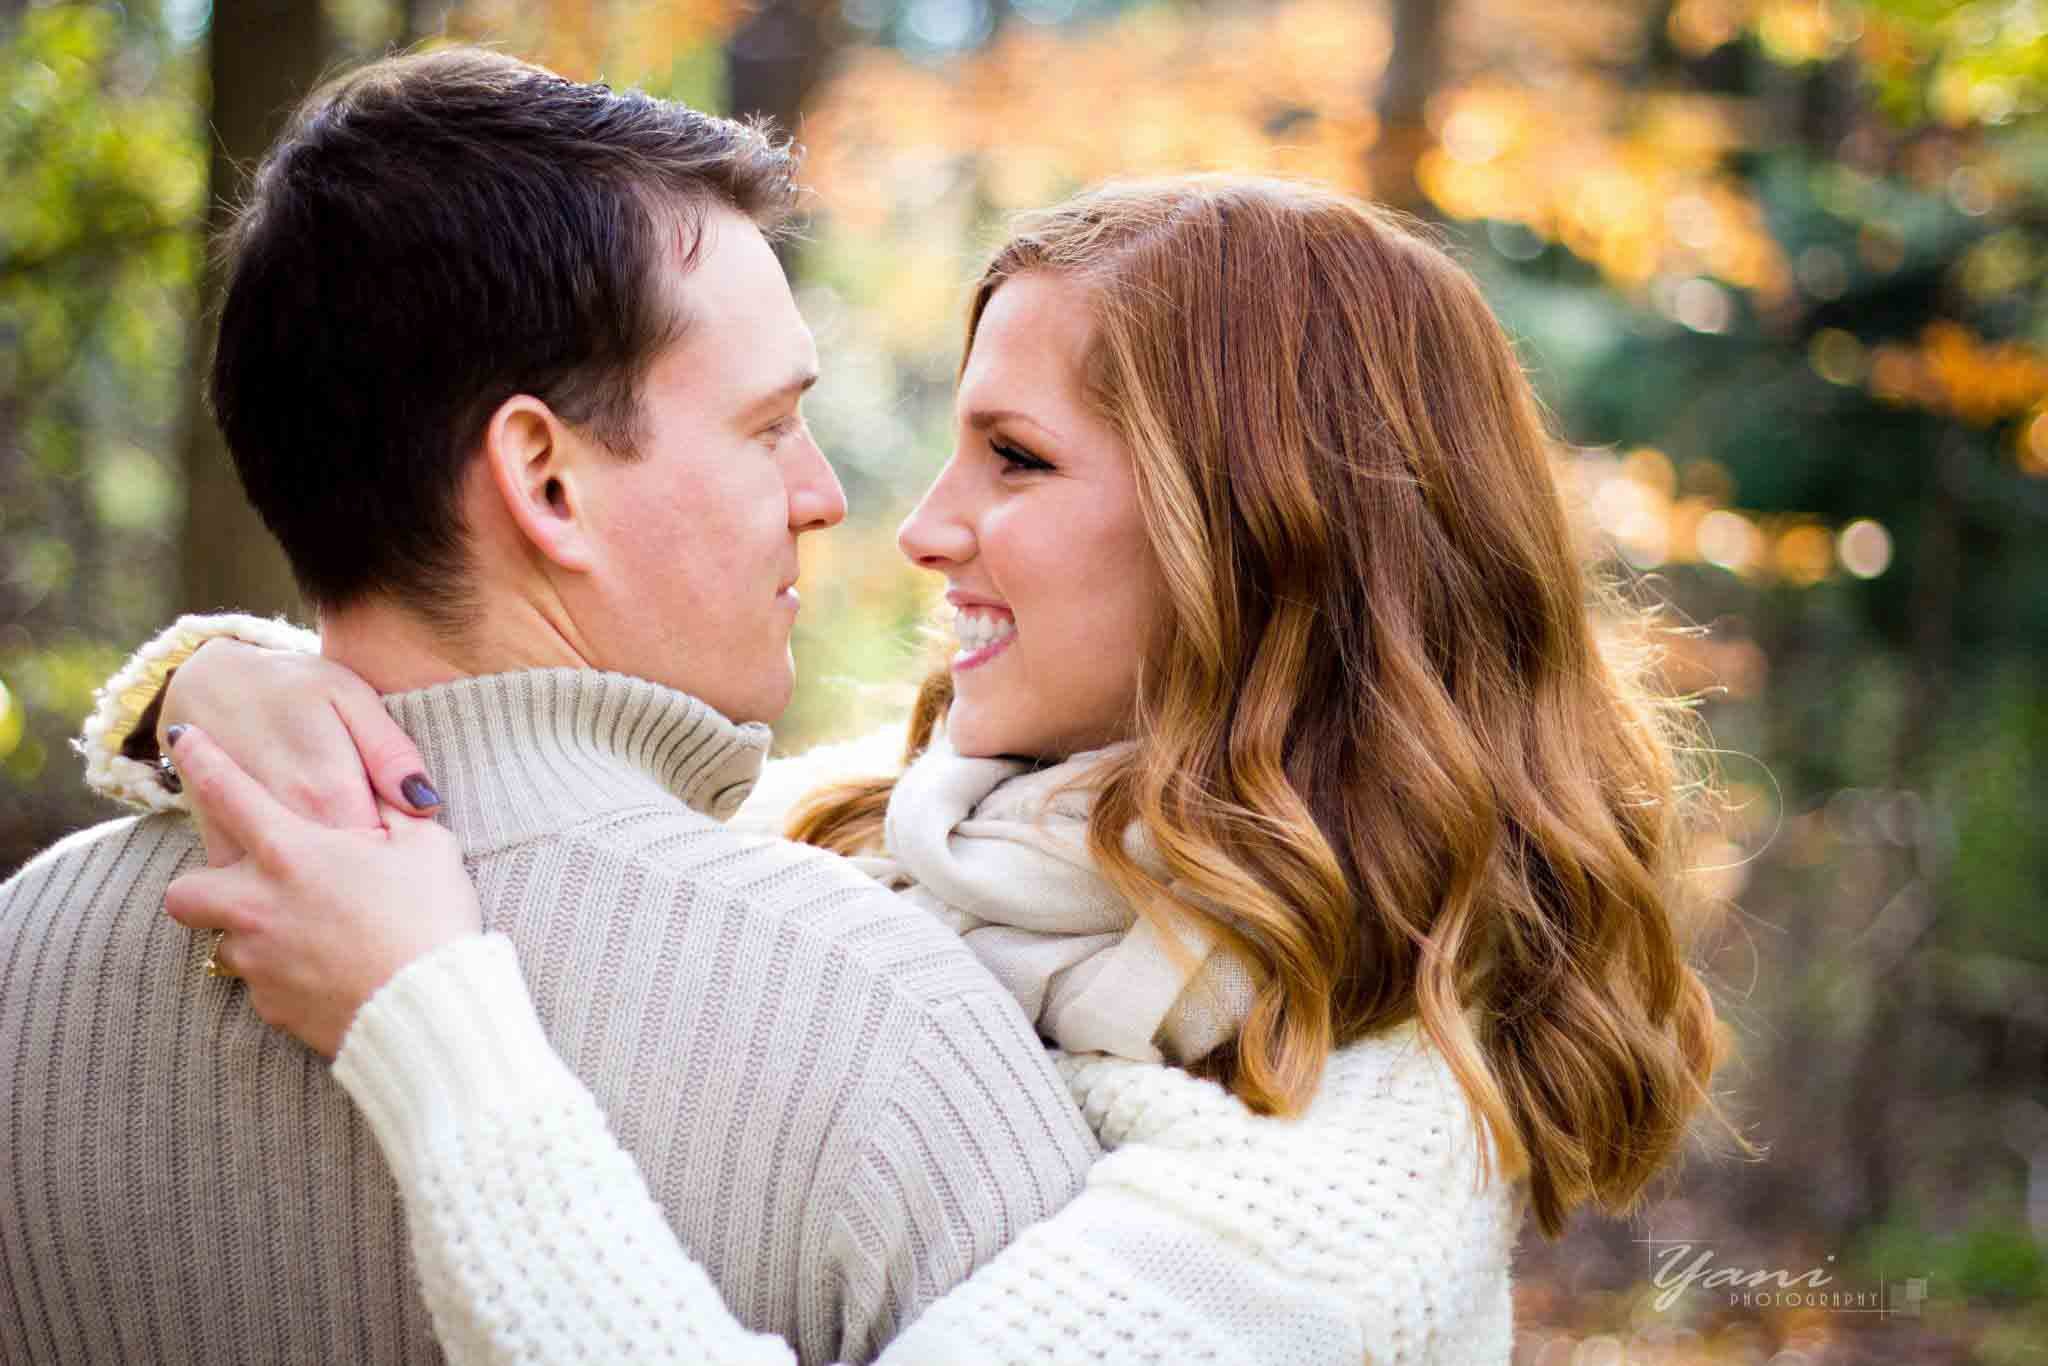 Guelph Fall Engagement Photo Shoot Session -01.jpg